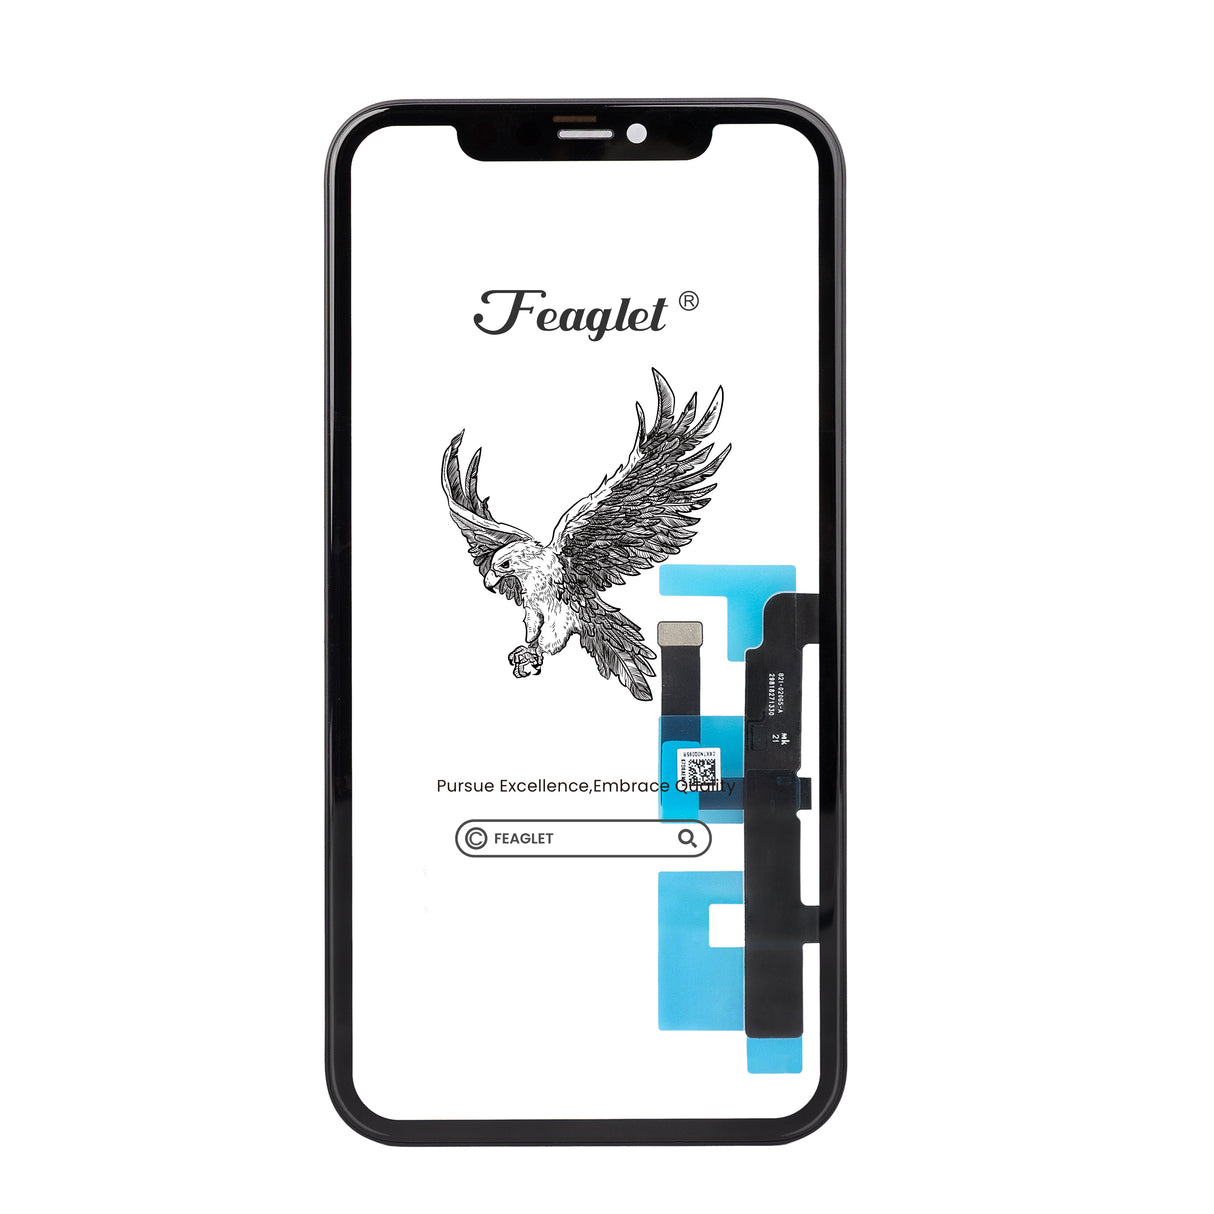 iPhone 11 Touch Screen Digitizer Replacement (With OCA& Frame) |for iPhone Display Repair| Original Materials Not bluish & 100% tested|-fly eagle feaglet Original